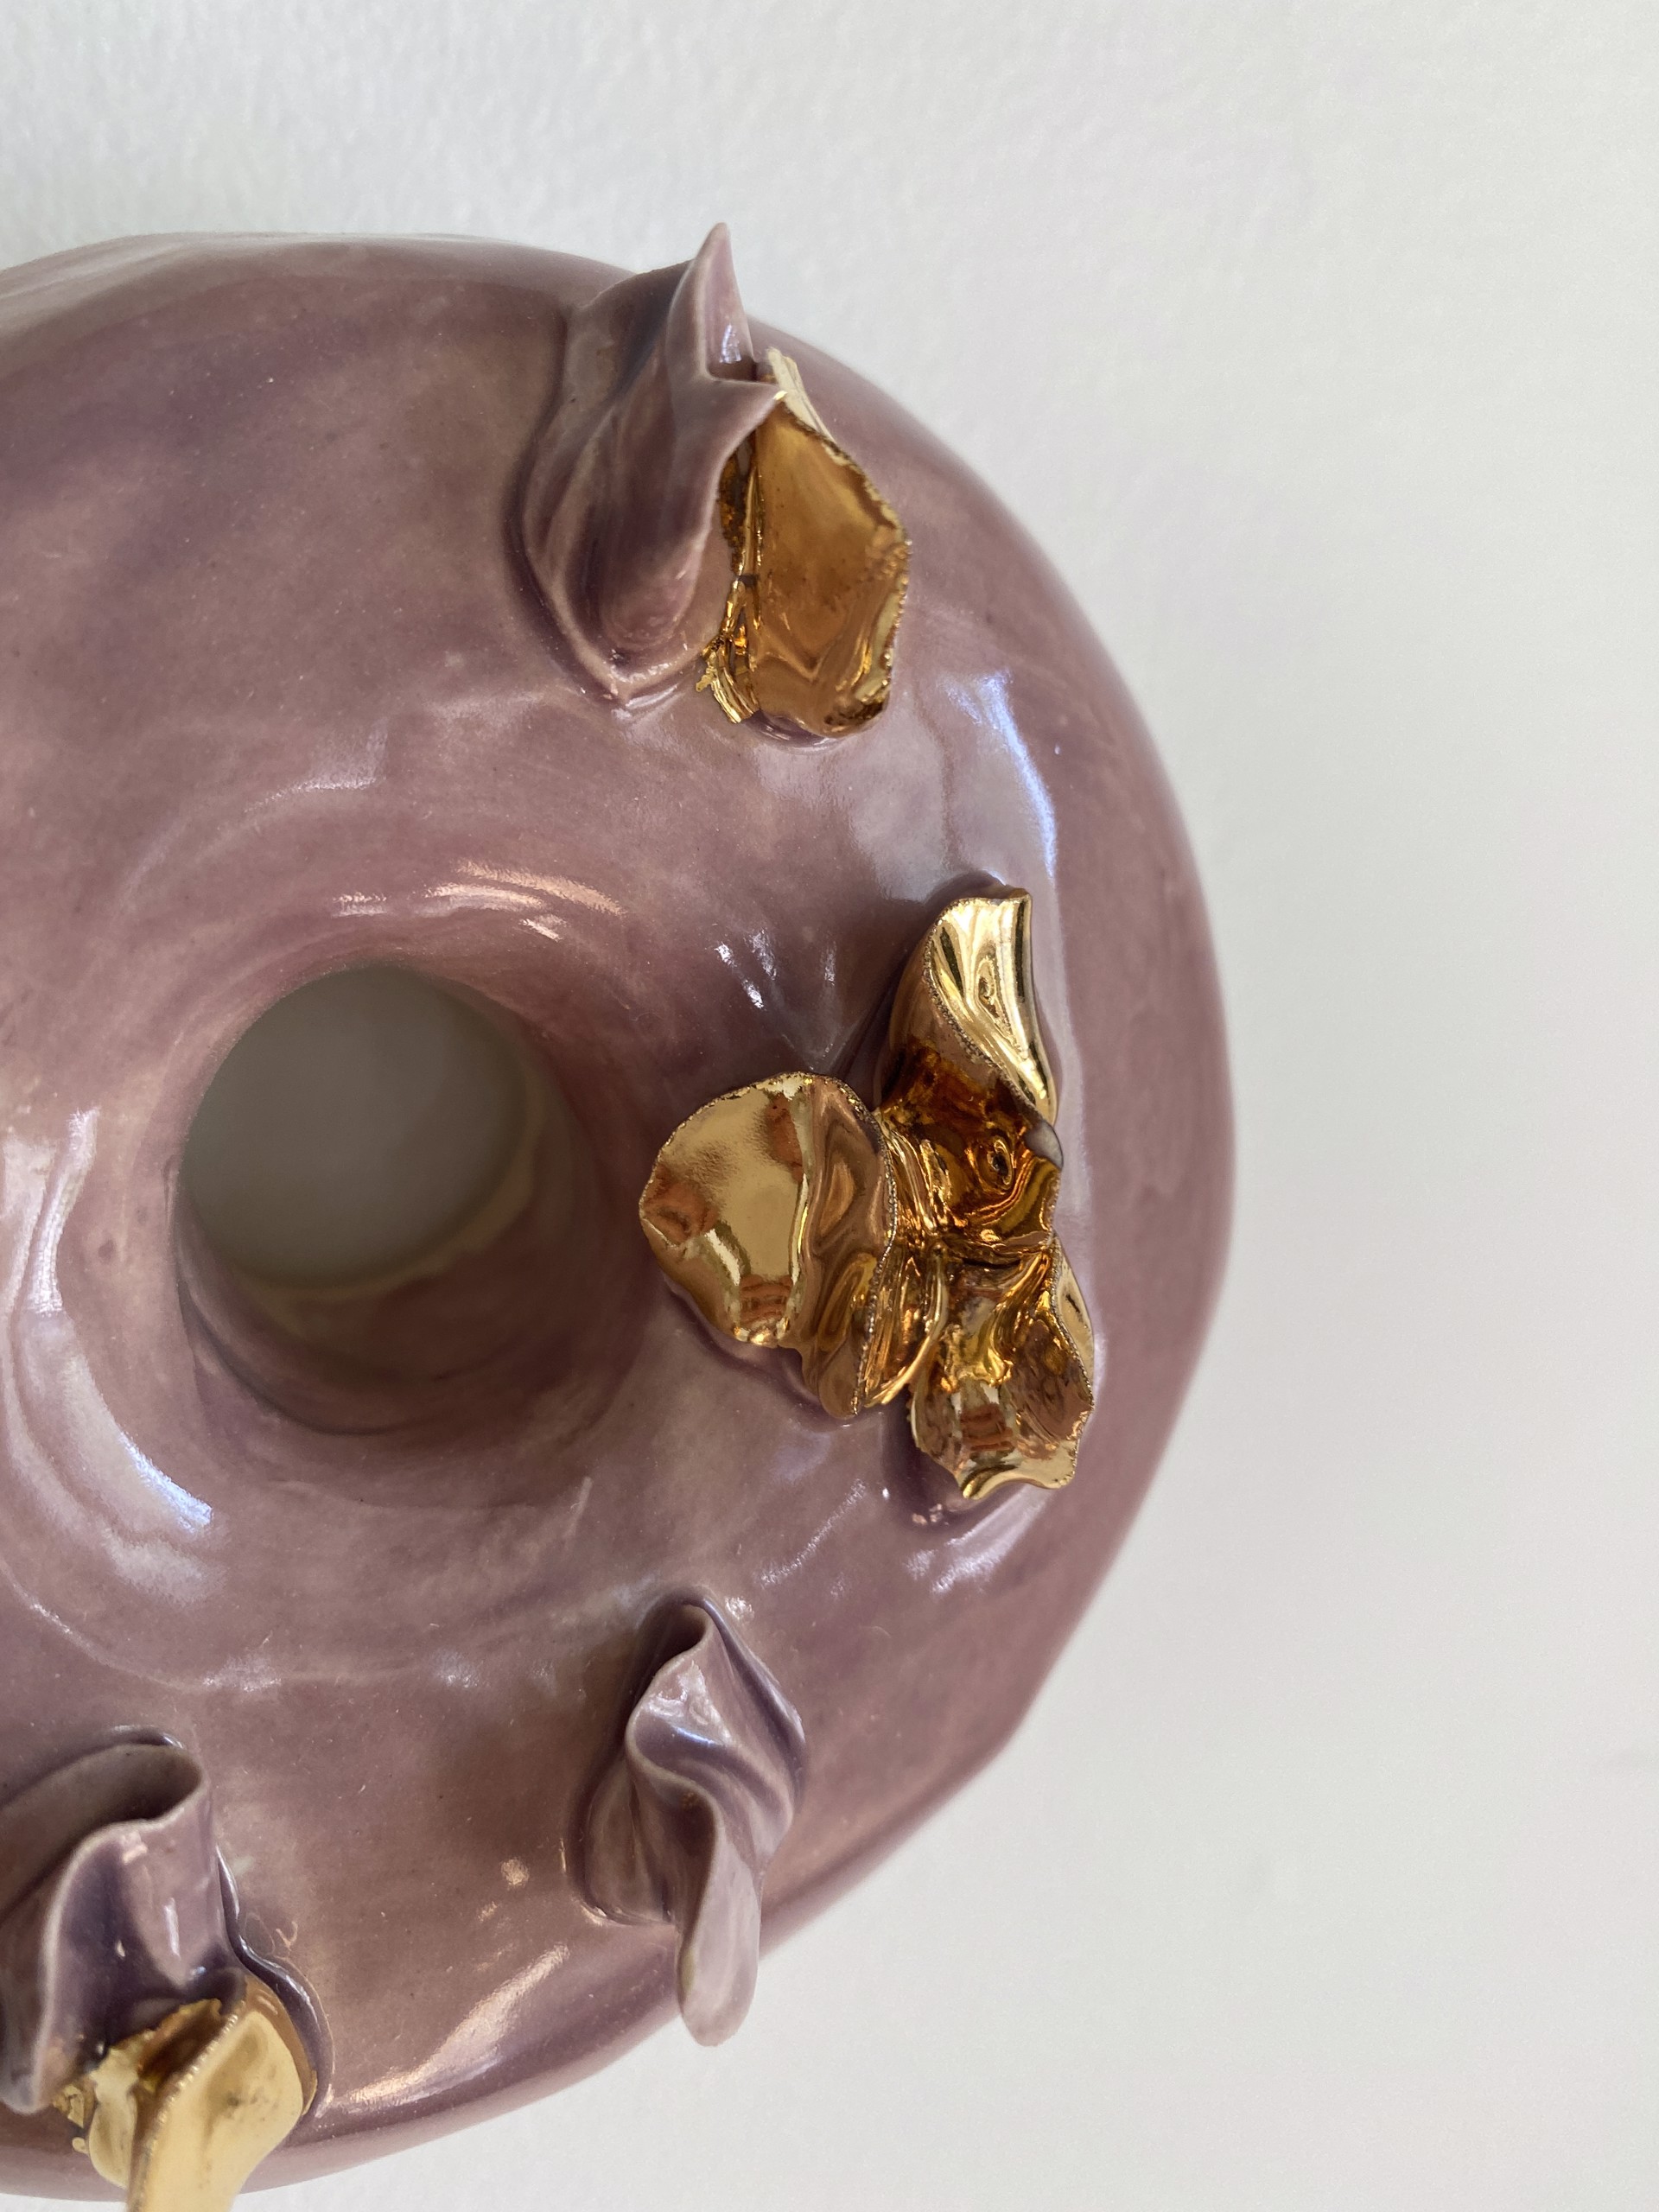 Lavender Donut With Gold Luster Flakes by Liv Antonecchia